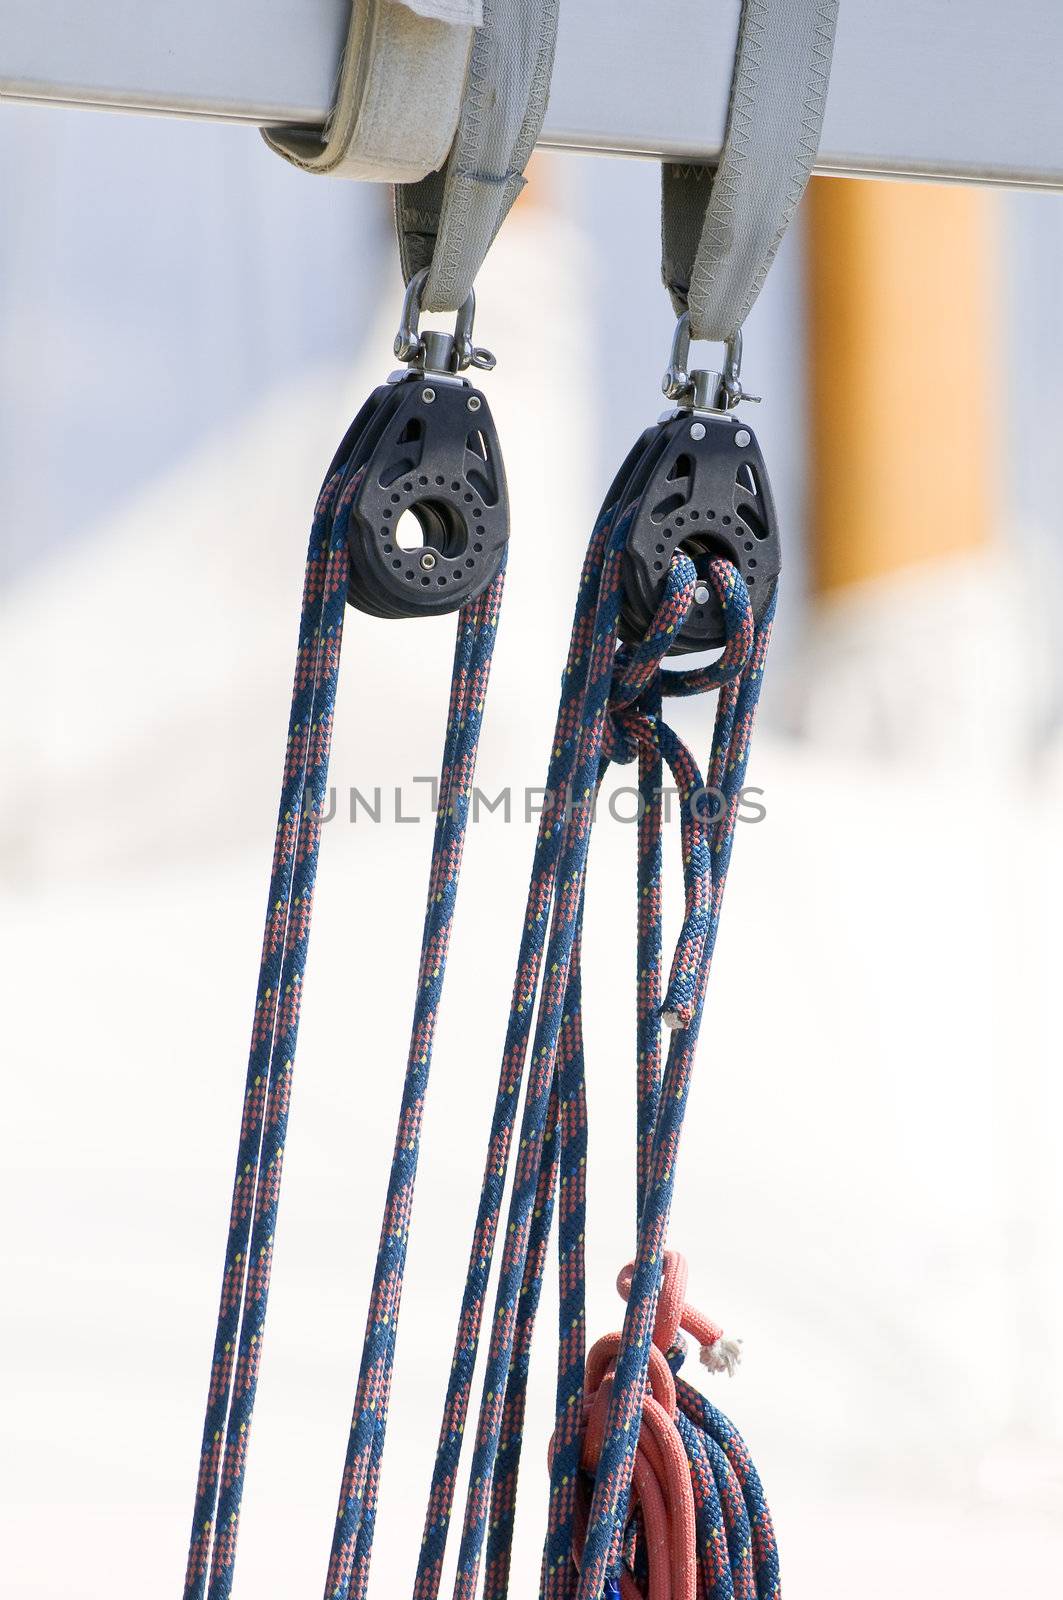 Sail boat pulley by lebanmax